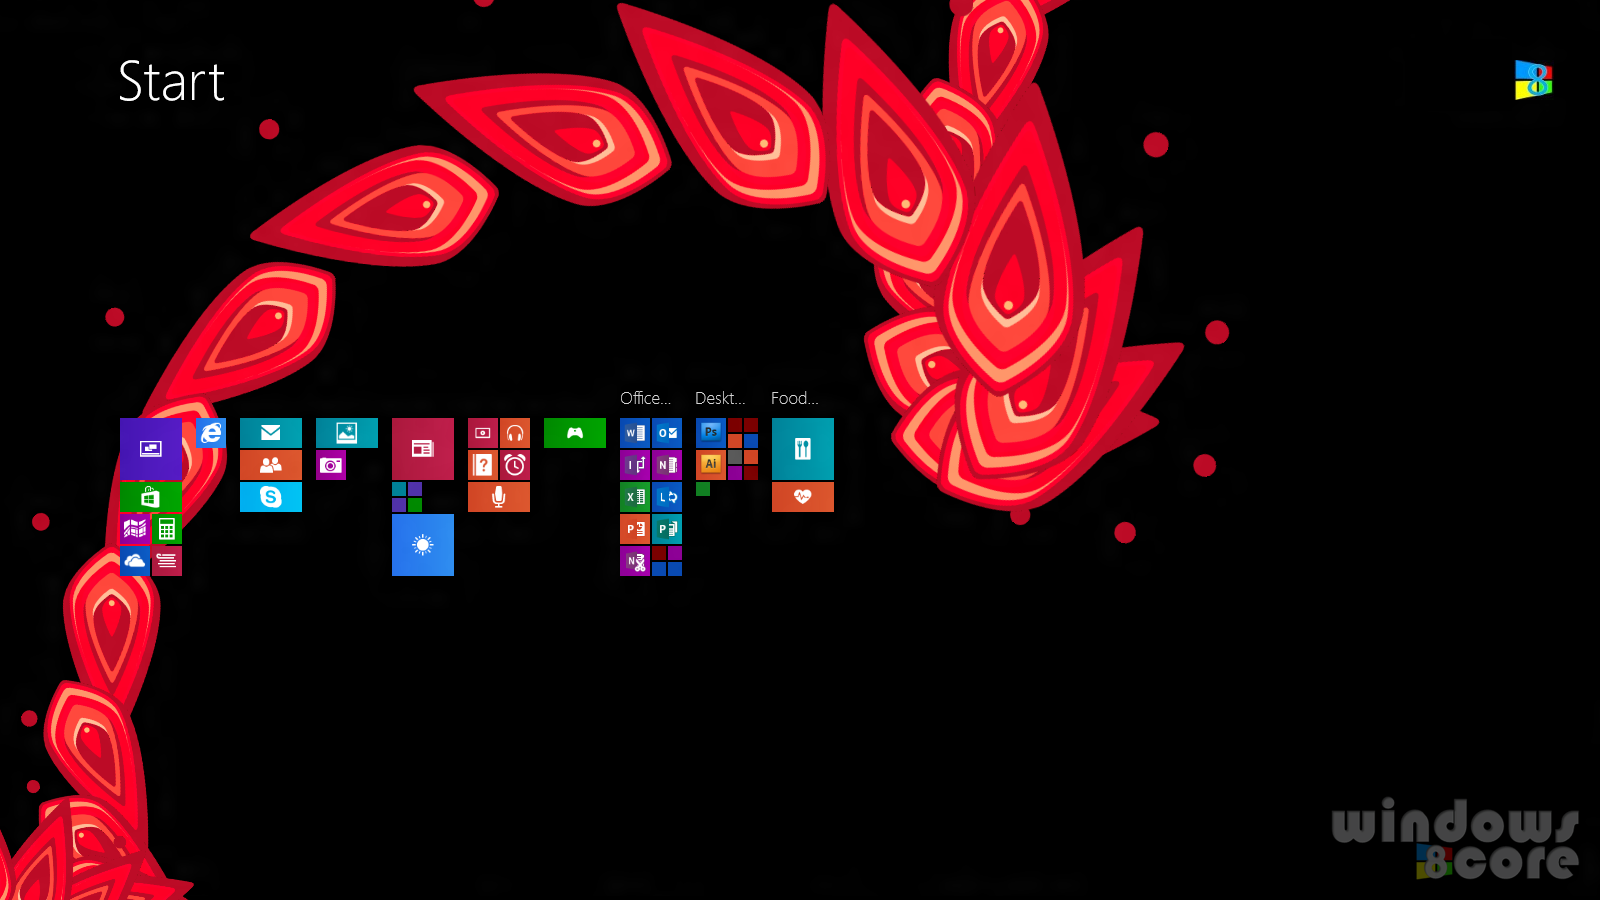 Here are the new animated Start Screen backgrounds of Windows 8.1